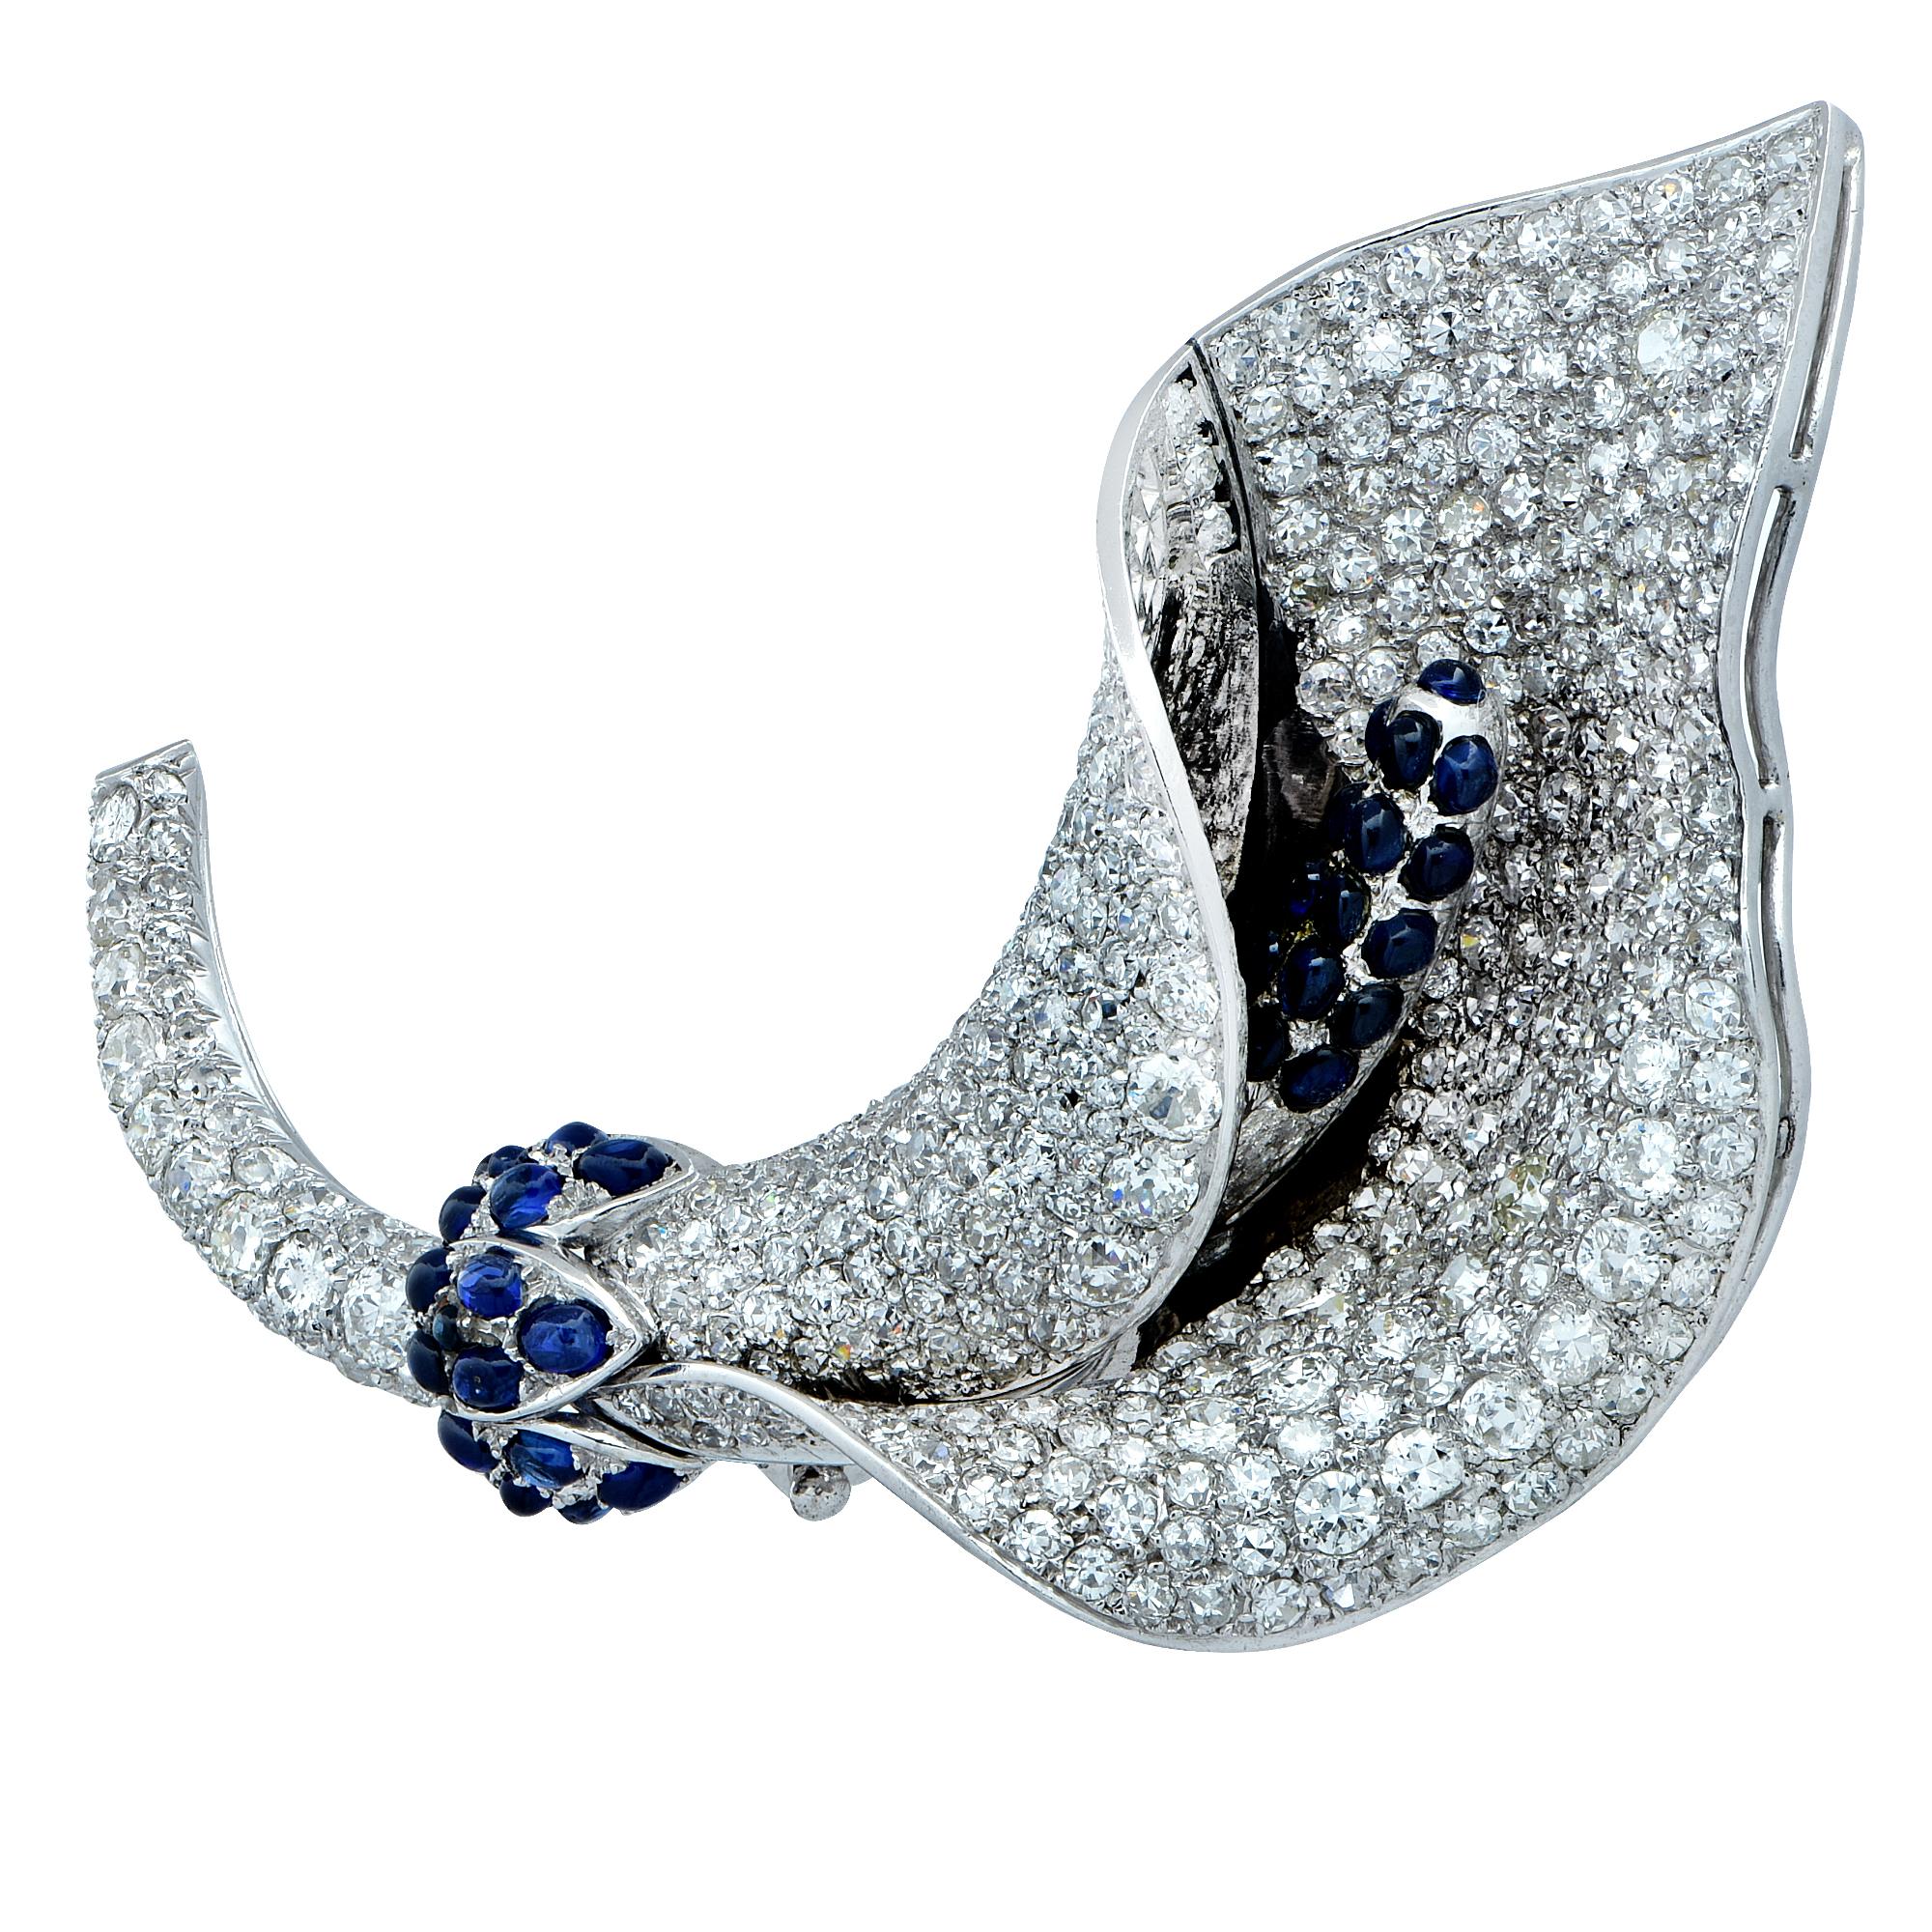 Sensational Art Deco brooch crafted in platinum, showcasing European cut and single cut diamonds weighing approximately 12 carats, G-J color, VS-SI clarity, accented by approximately 1.5cts of cabochon blue sapphires, finely crafted in a Lily. This